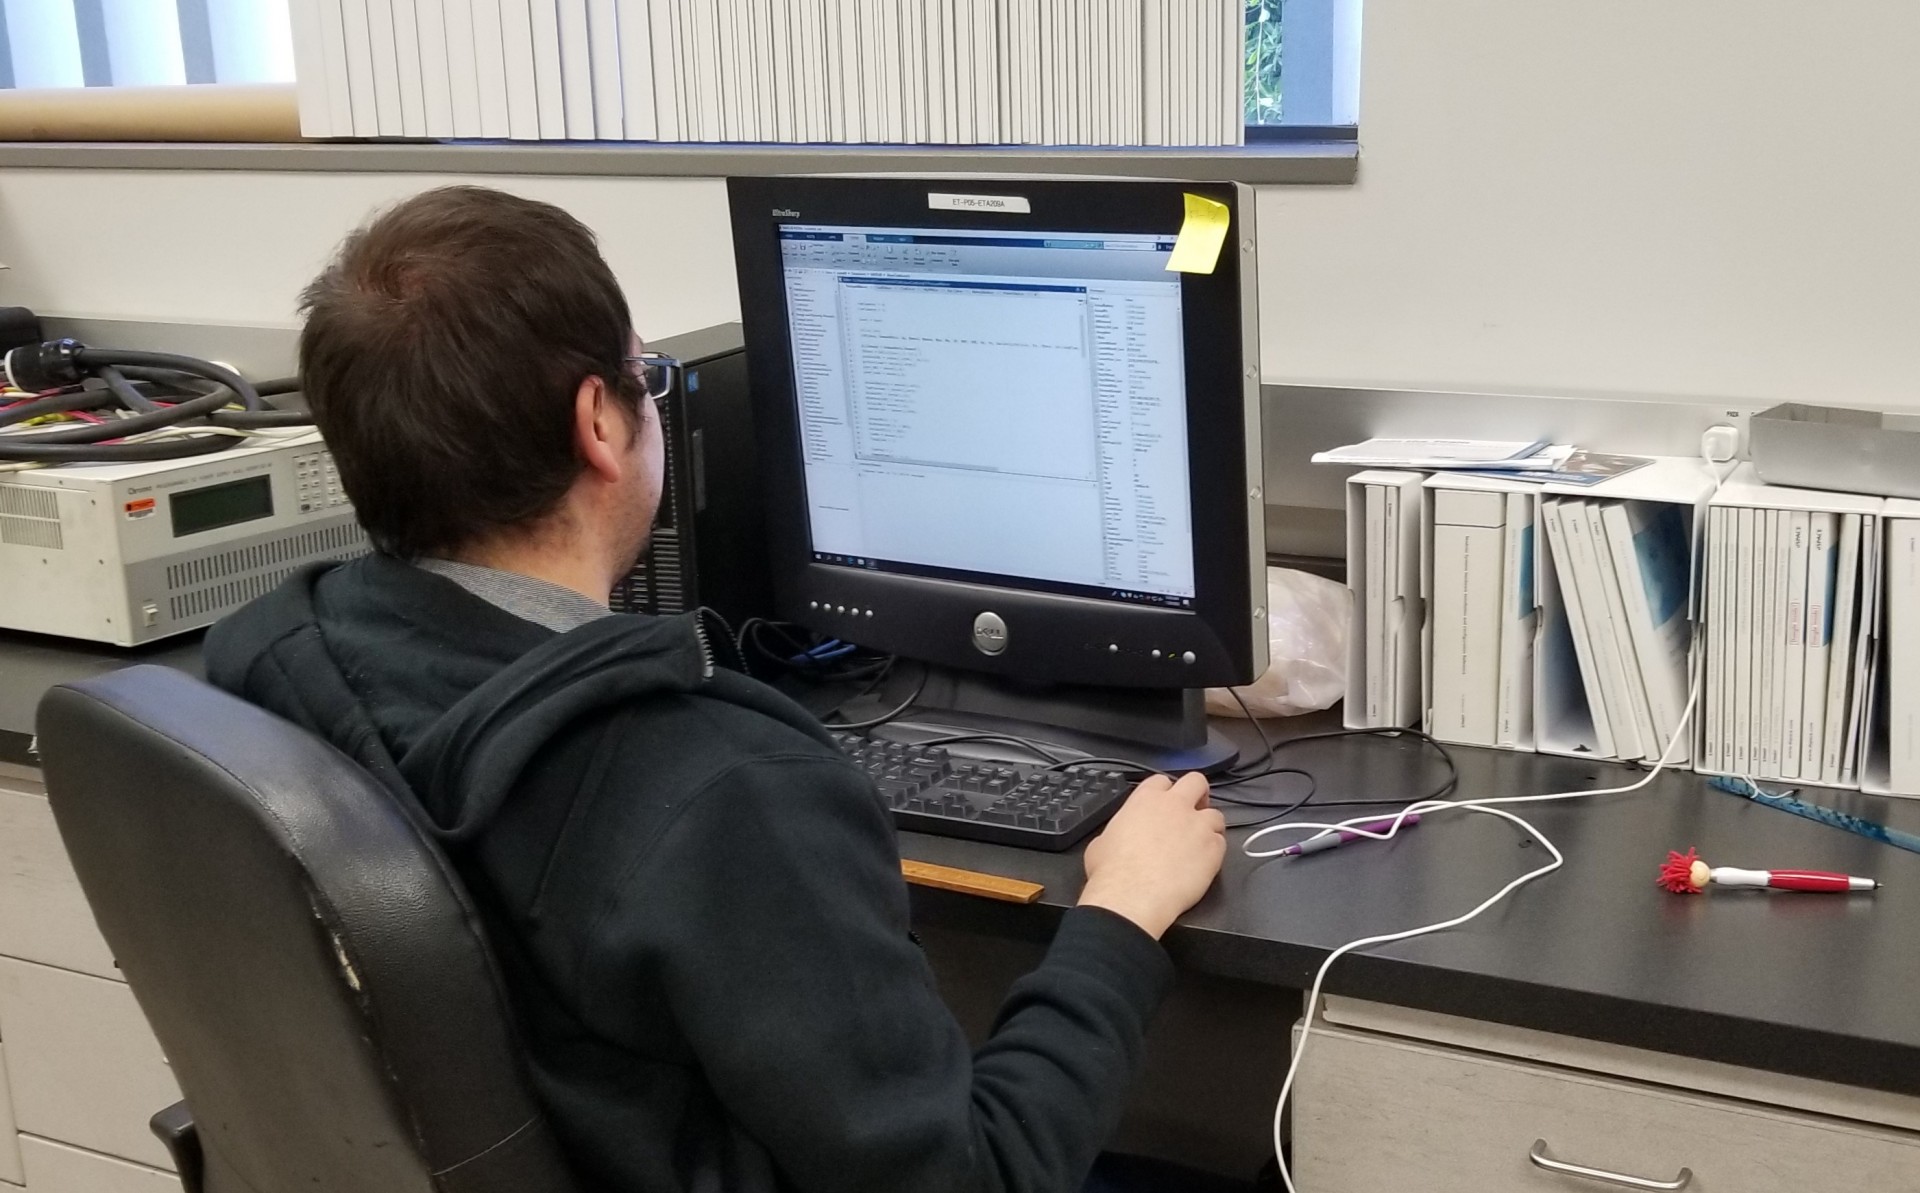 A student working with MATLAB